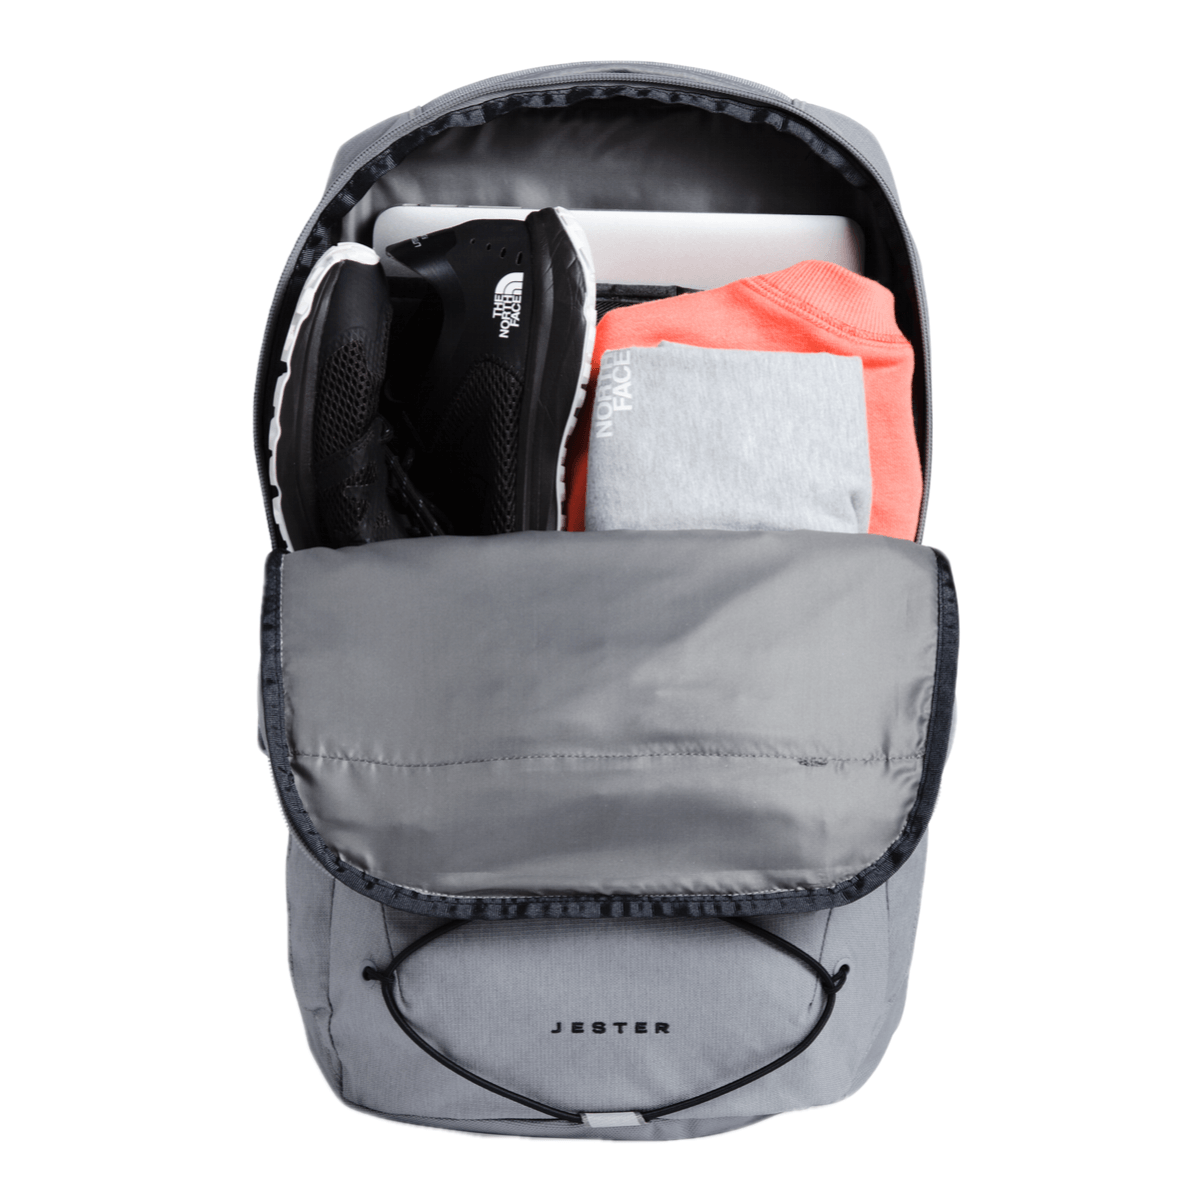 Chaise longue Aankondiging Zuidoost The North Face Jester Backpack - Als.com